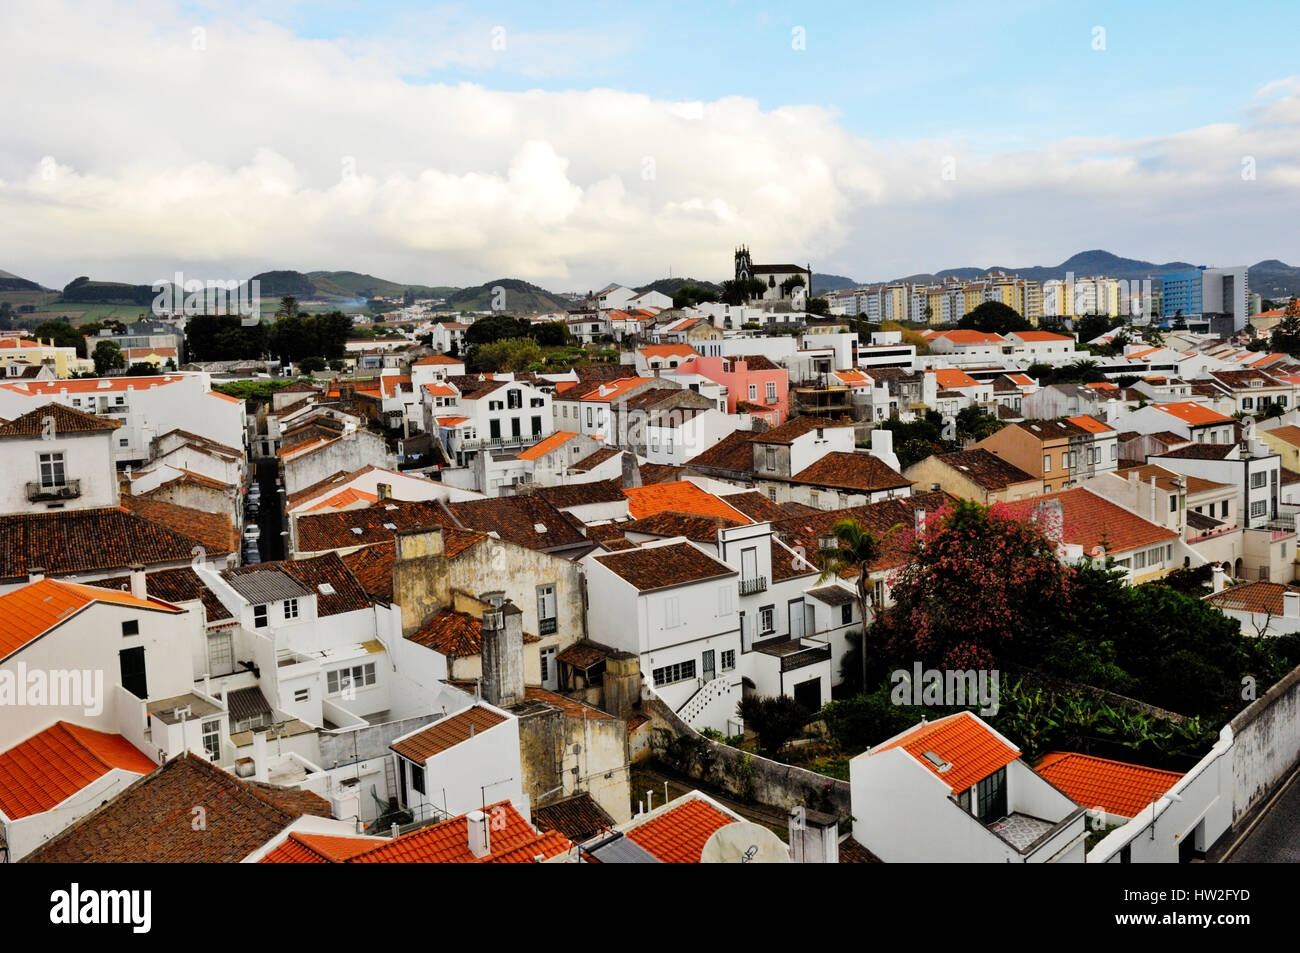 Overlooking houses in Horta with white walls and red roofs, Ponta Delgada, Sao Miguel Island, Azores, Portugal Stock Photo